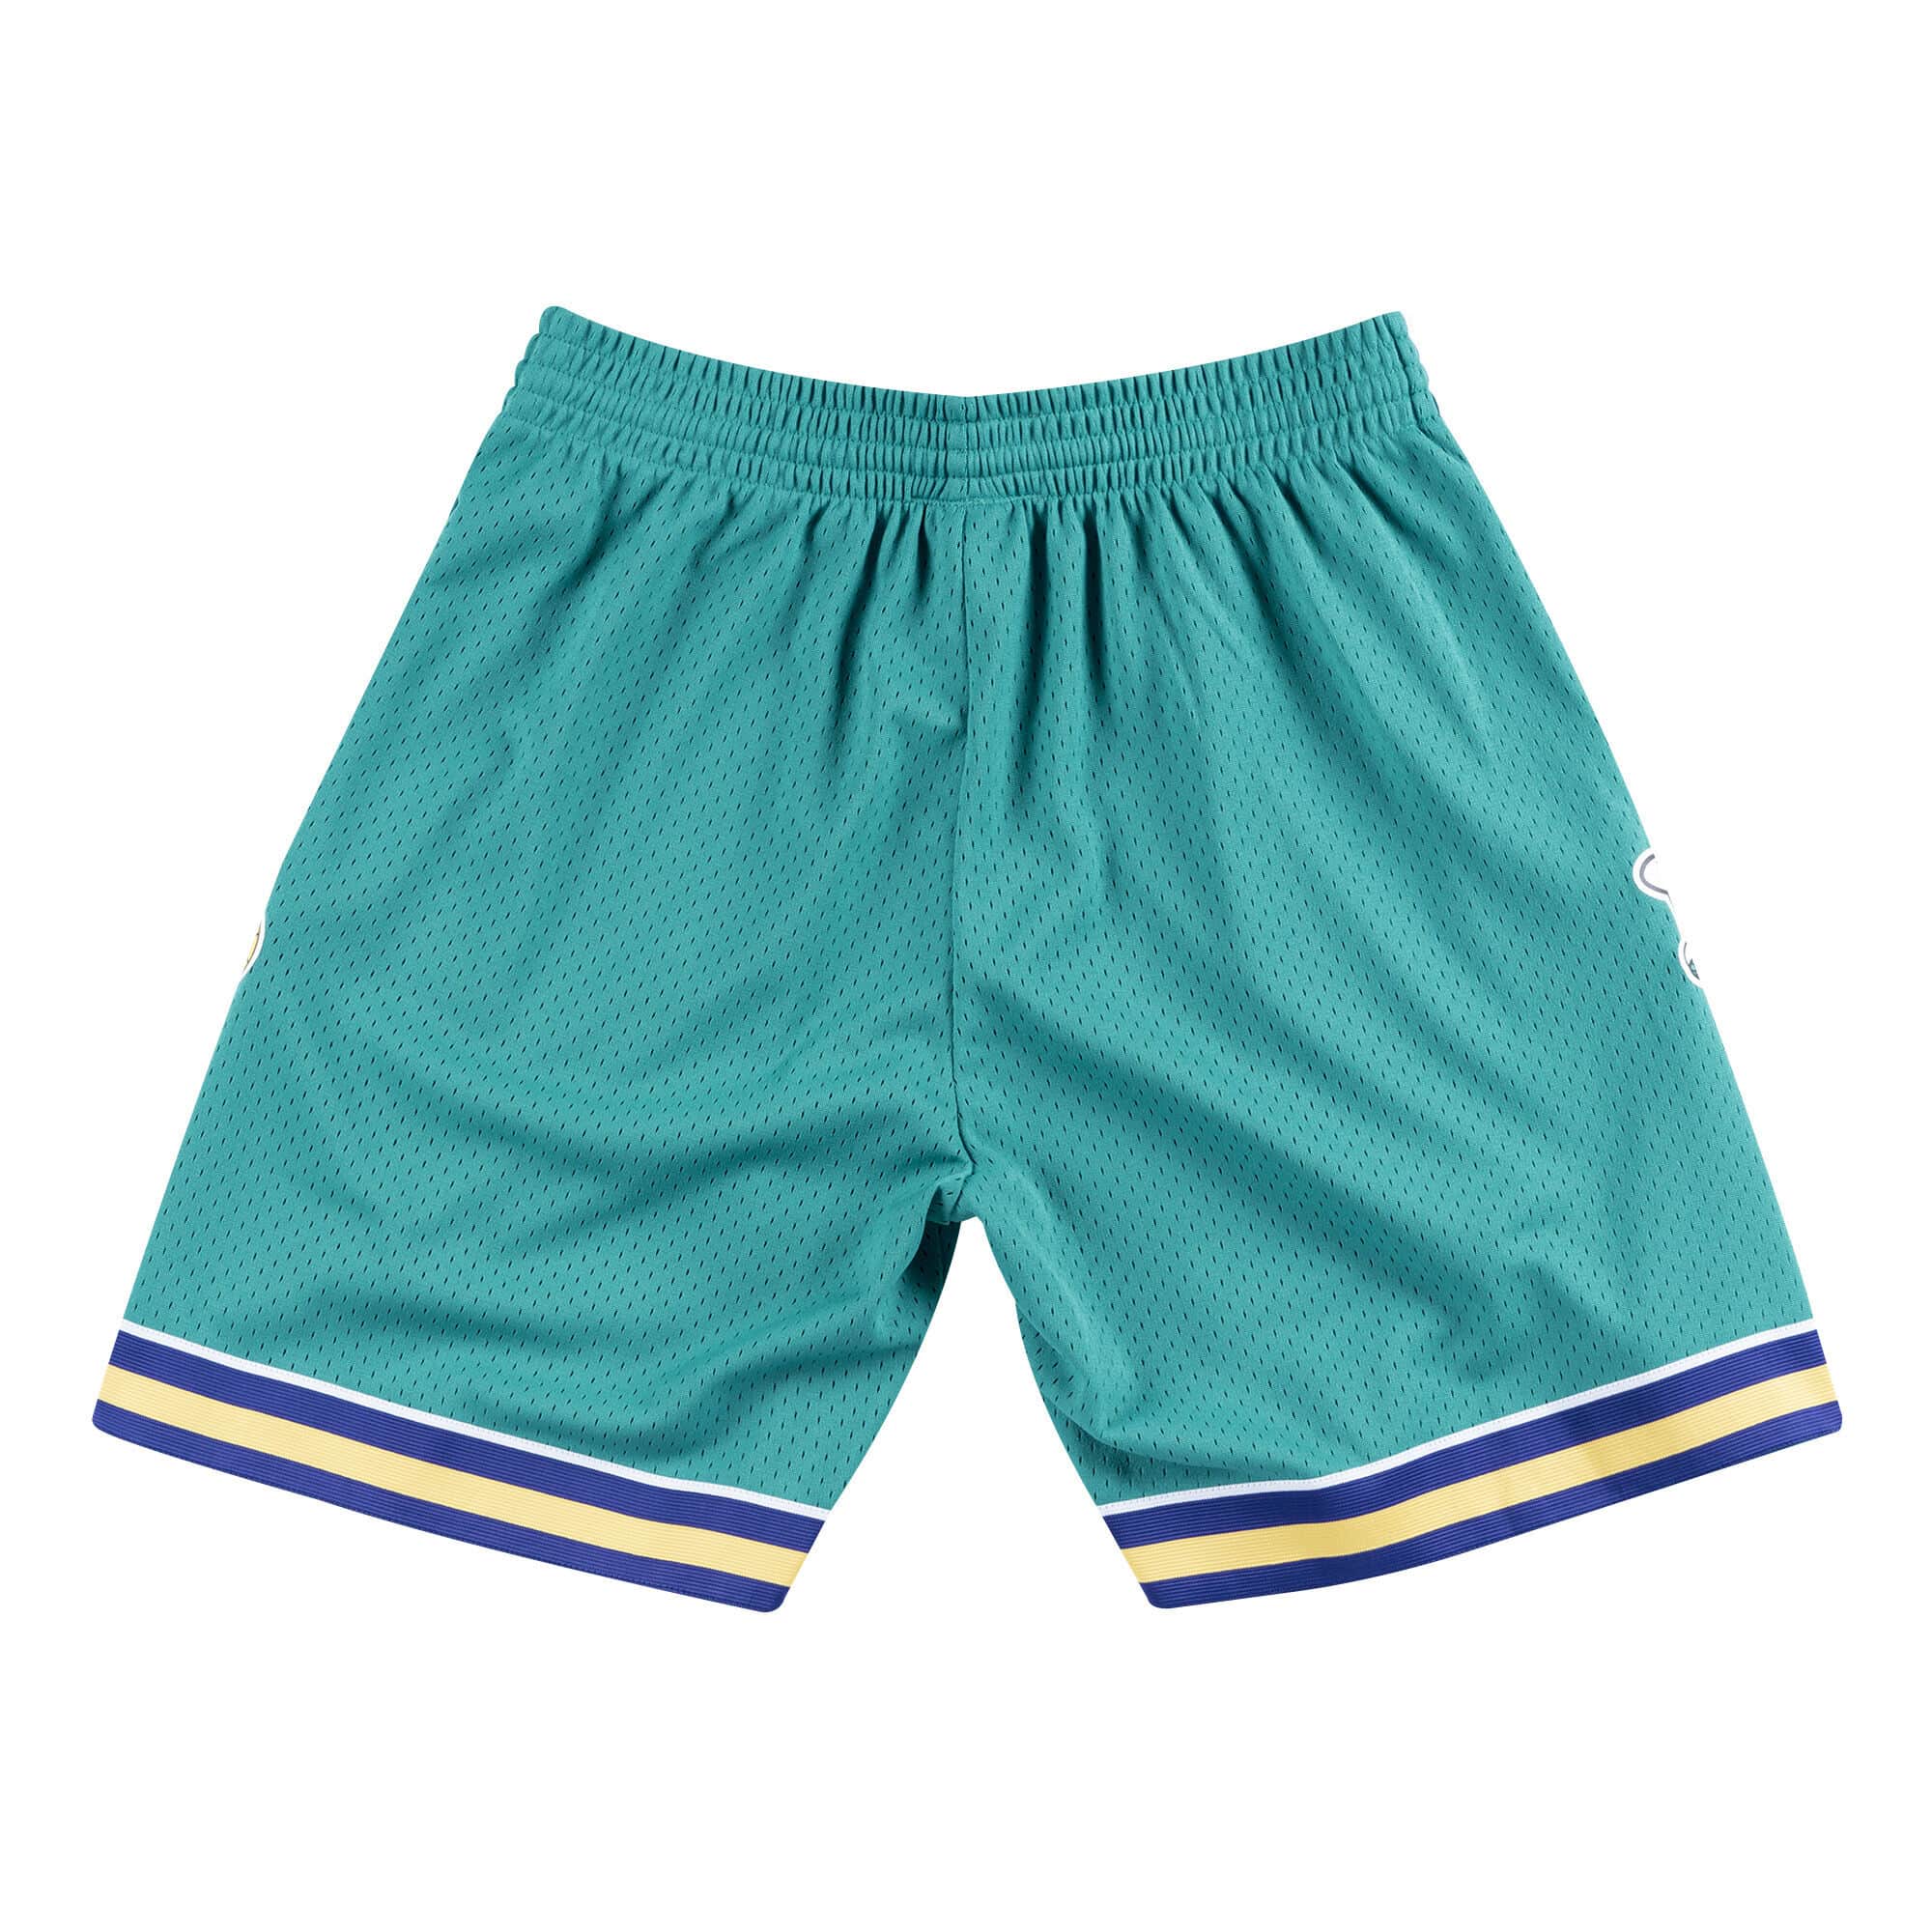 Teal New Orleans Hornets 2005-06 Mitchell & Ness Hardeood Classic Men's Swingman Shorts